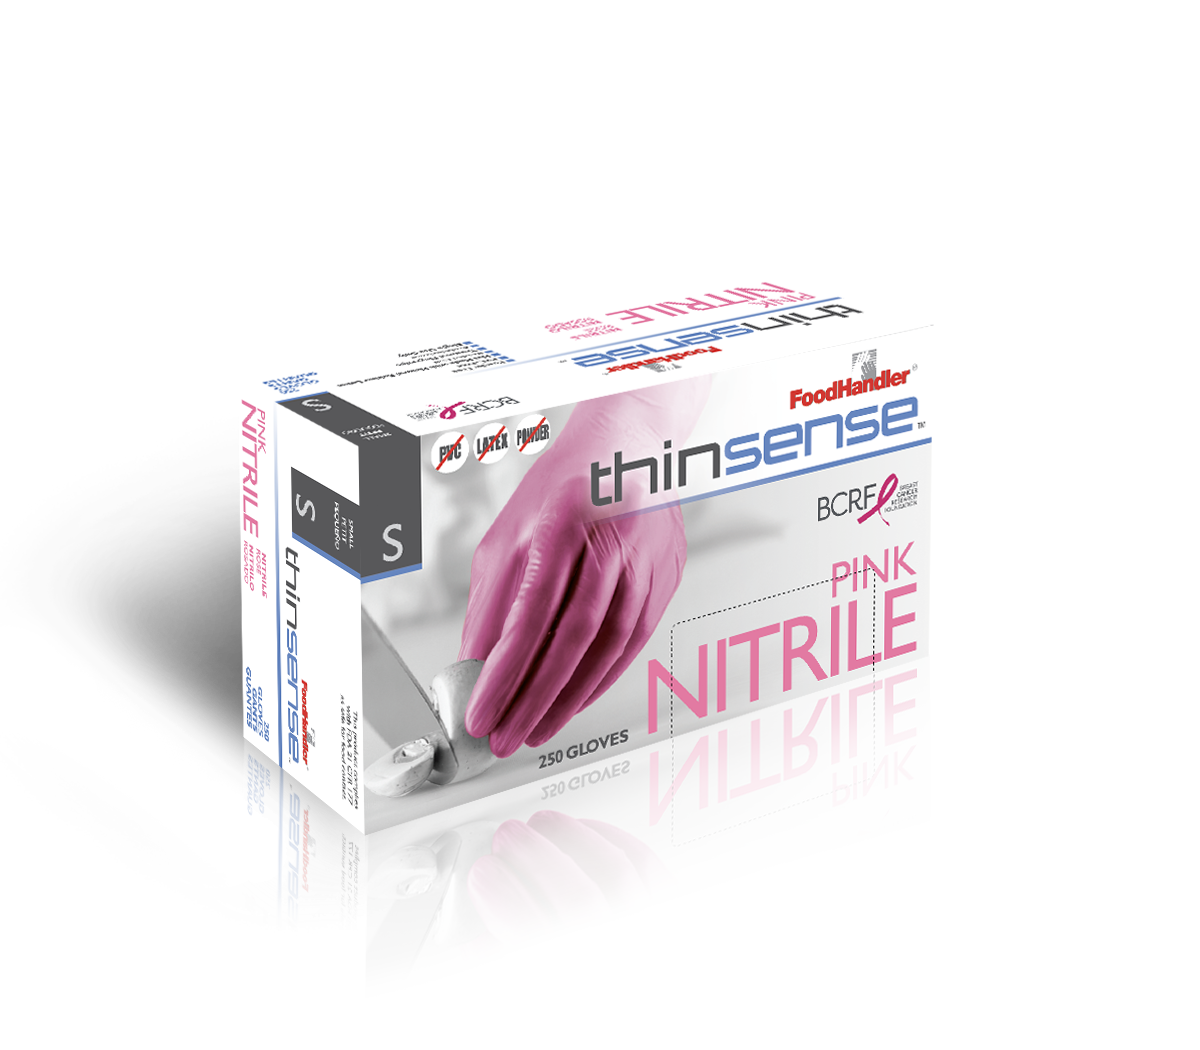 thinsense® Pink Nitrile Gloves and Breast Cancer Research Foundation